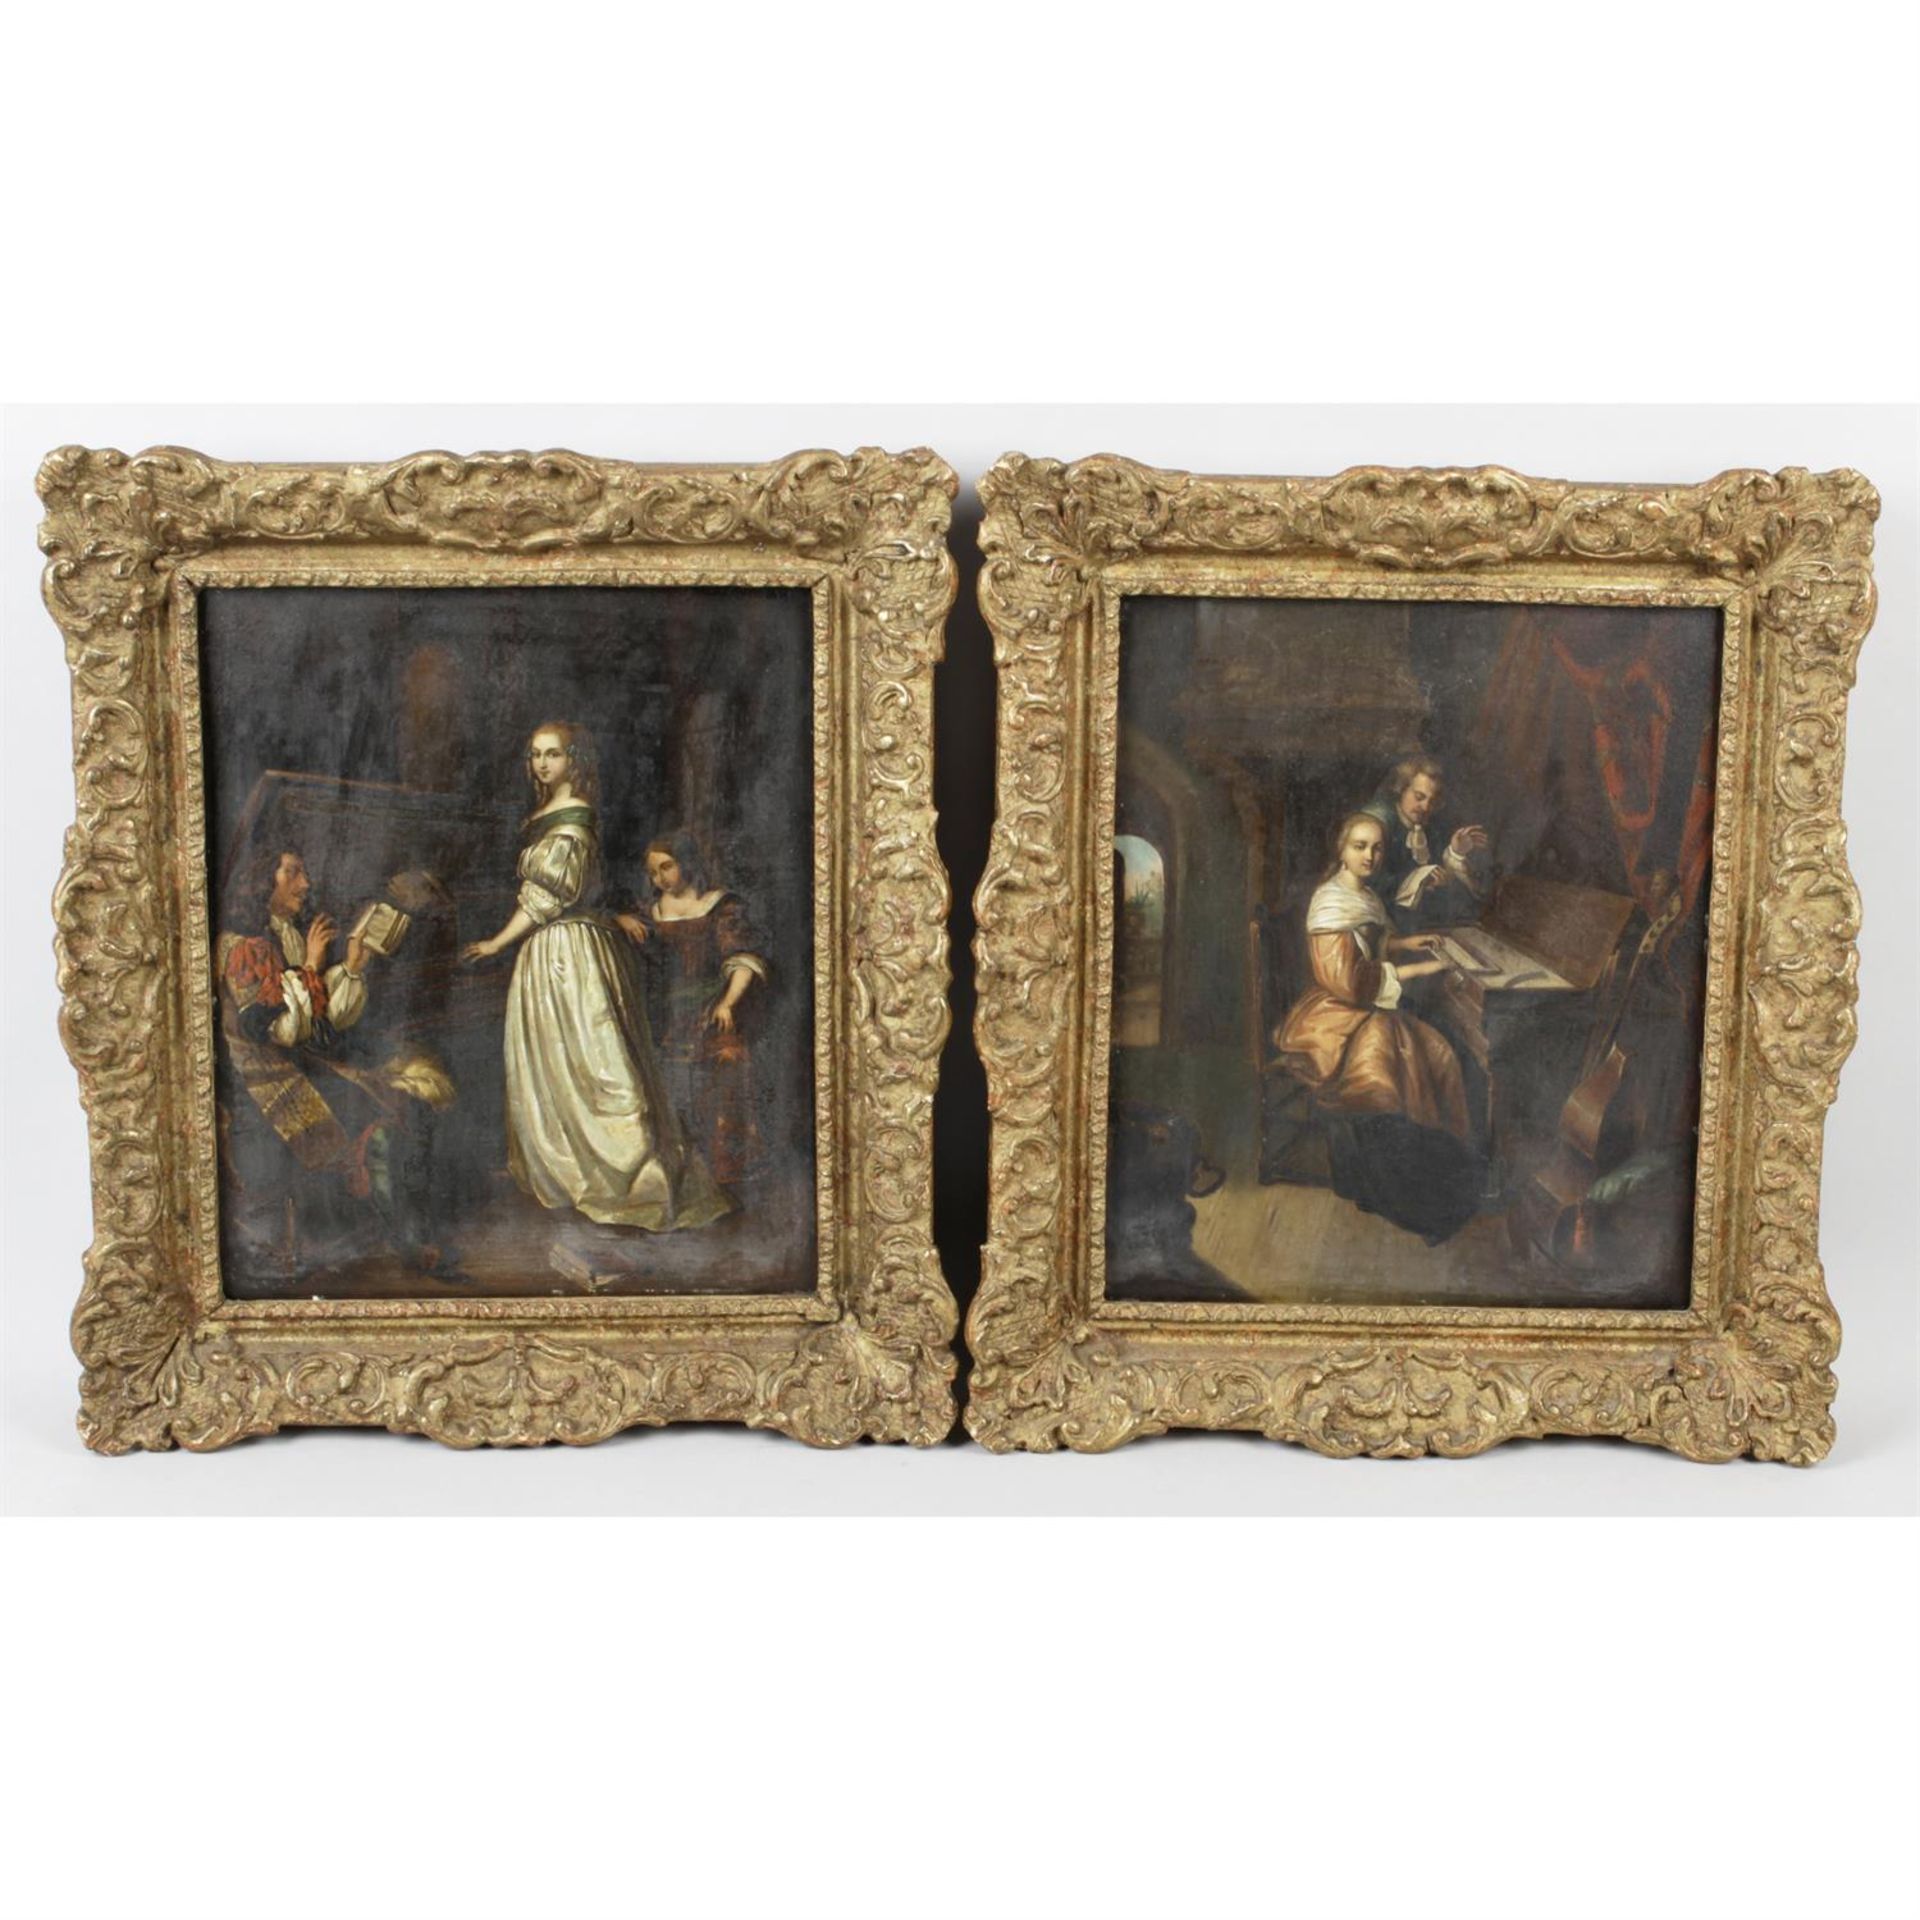 A pair of 19th century oil paintings.